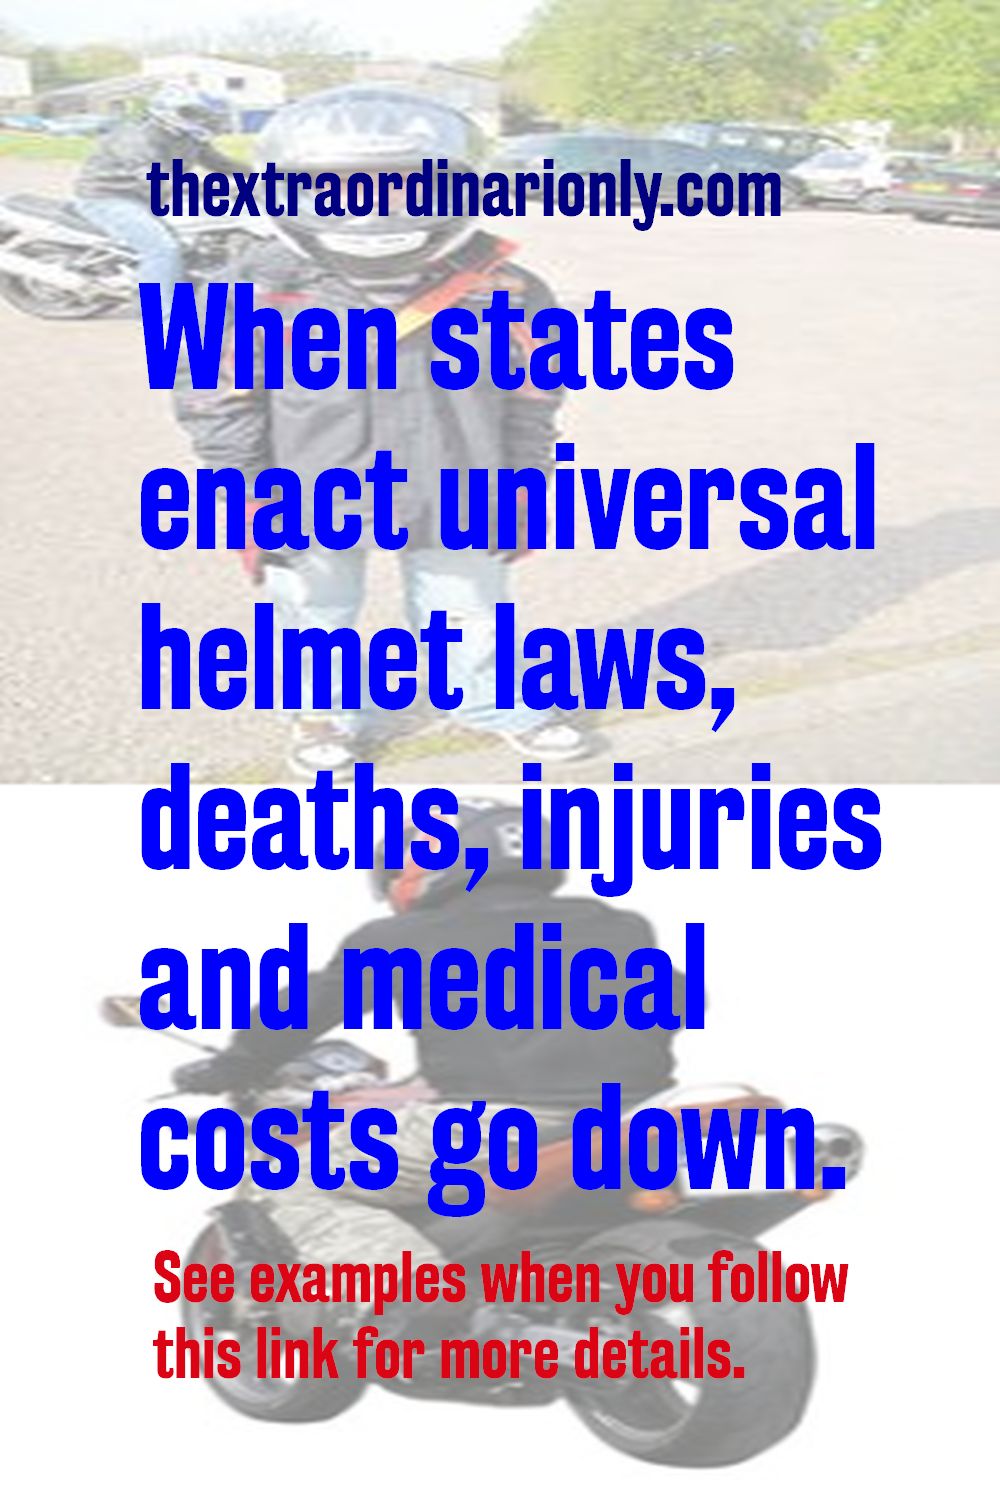 When states enact universal helmet laws, deaths, injuries and medical costs go down